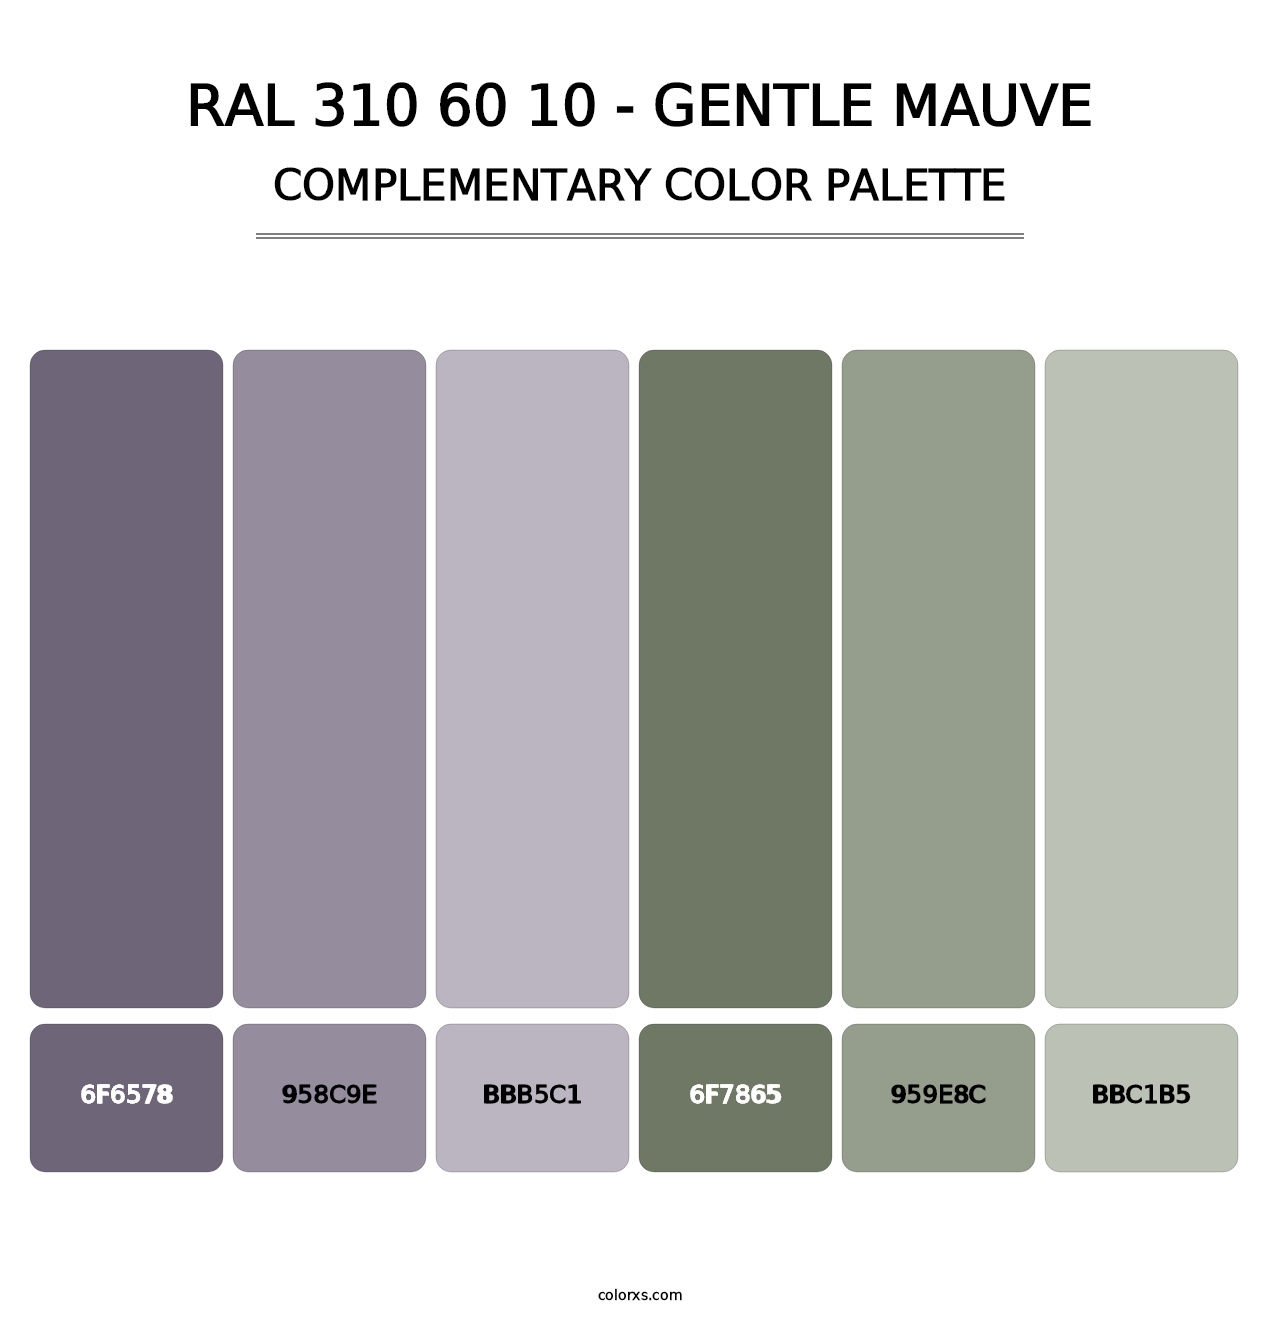 RAL 310 60 10 - Gentle Mauve - Complementary Color Palette